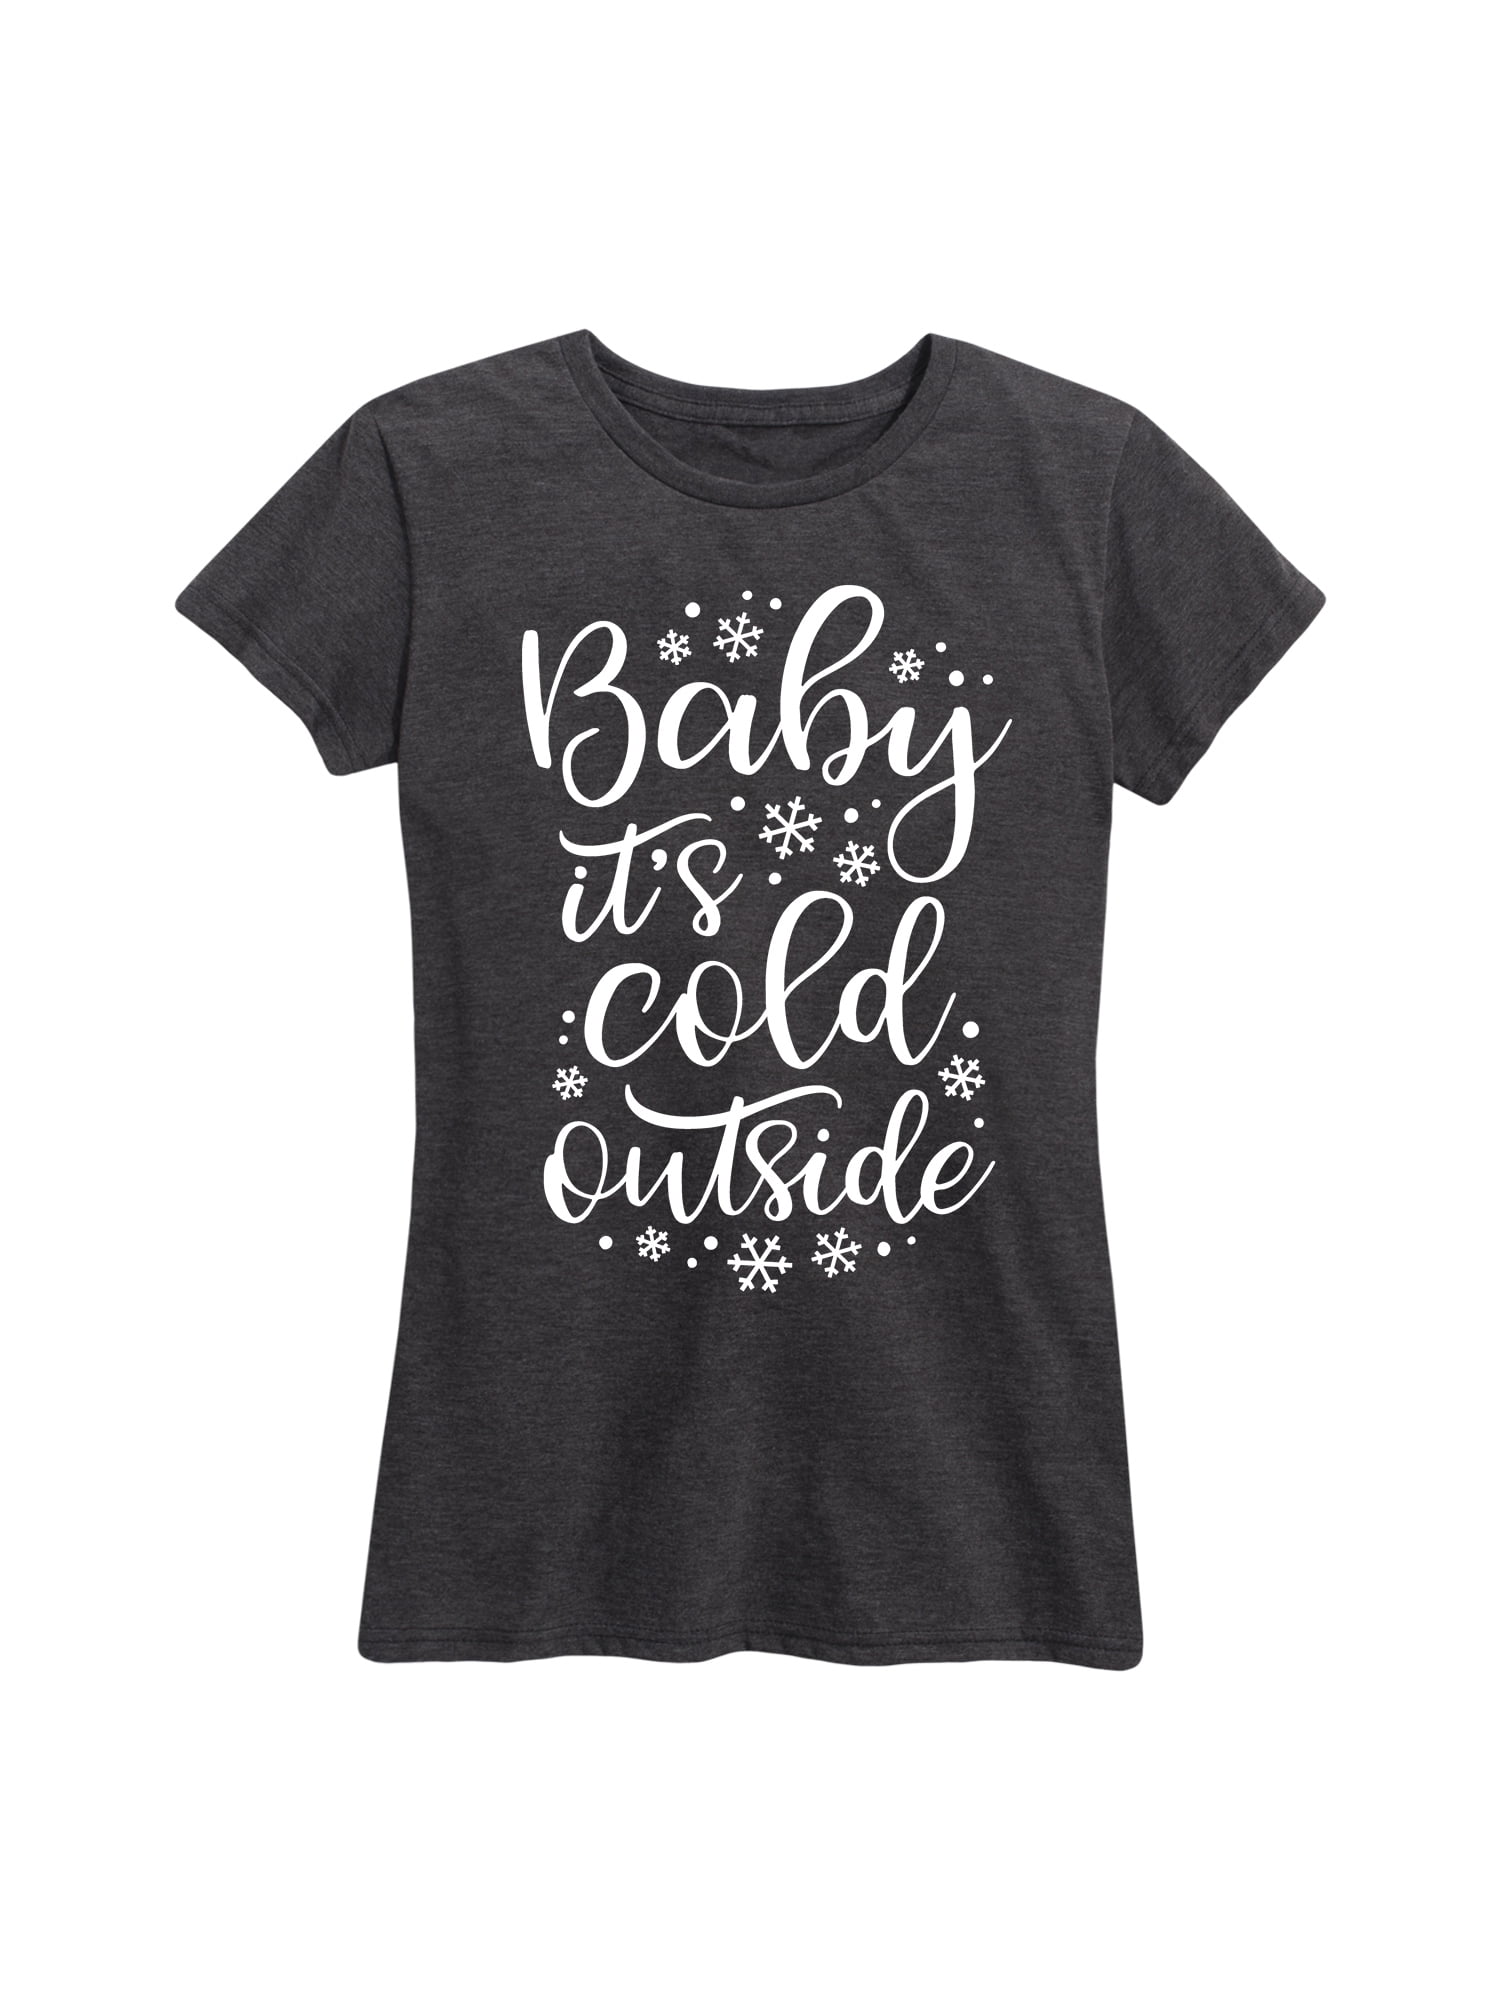 Instant Message - Baby Its Cold Outside - Women's Short Sleeve Graphic ...